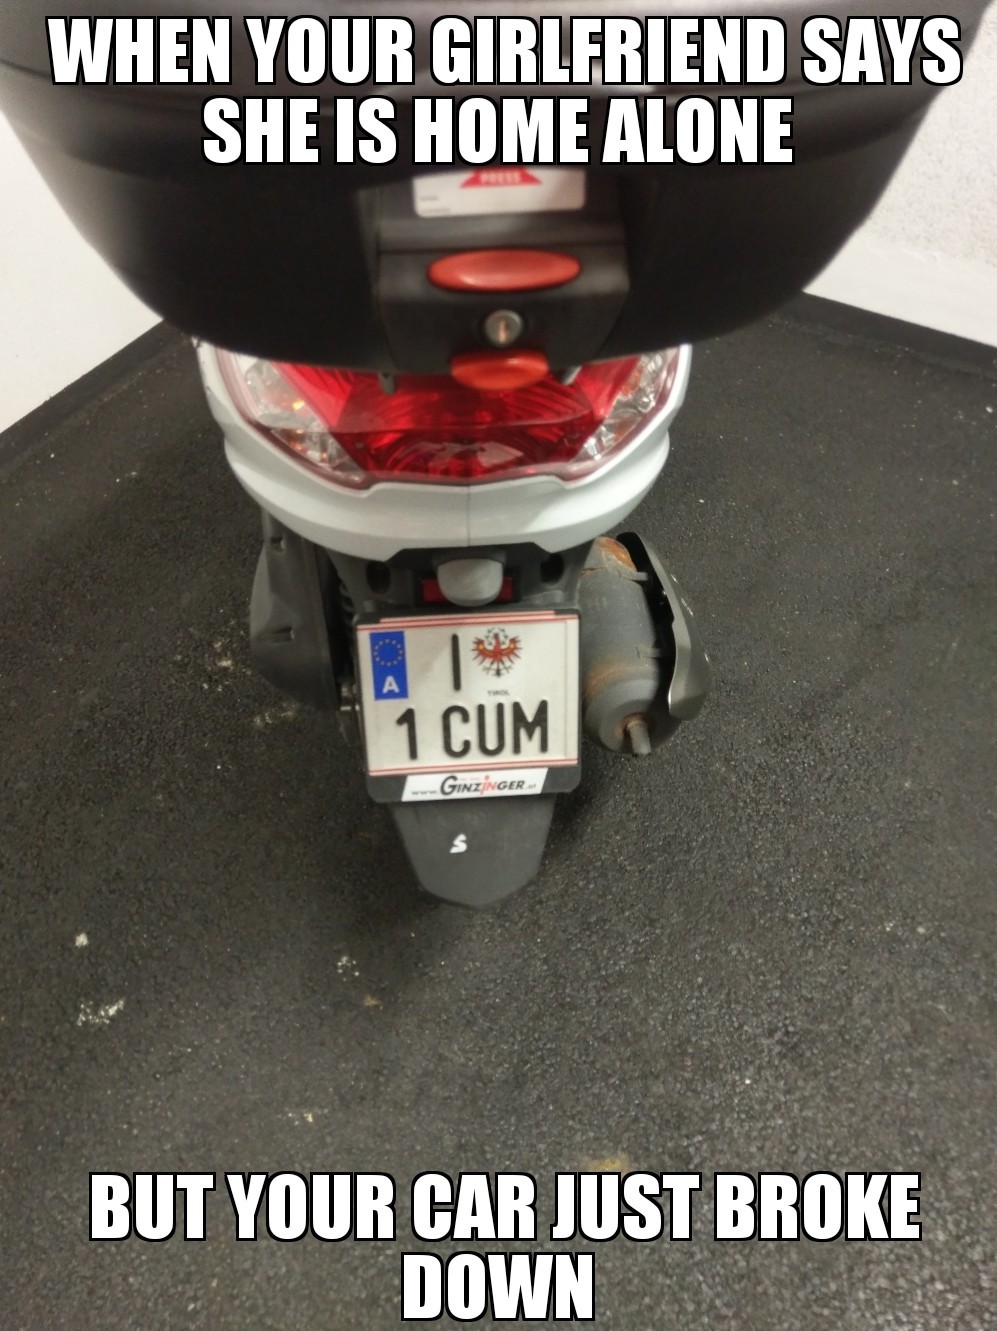 The mofa license plate i found recently fits perfectly - meme